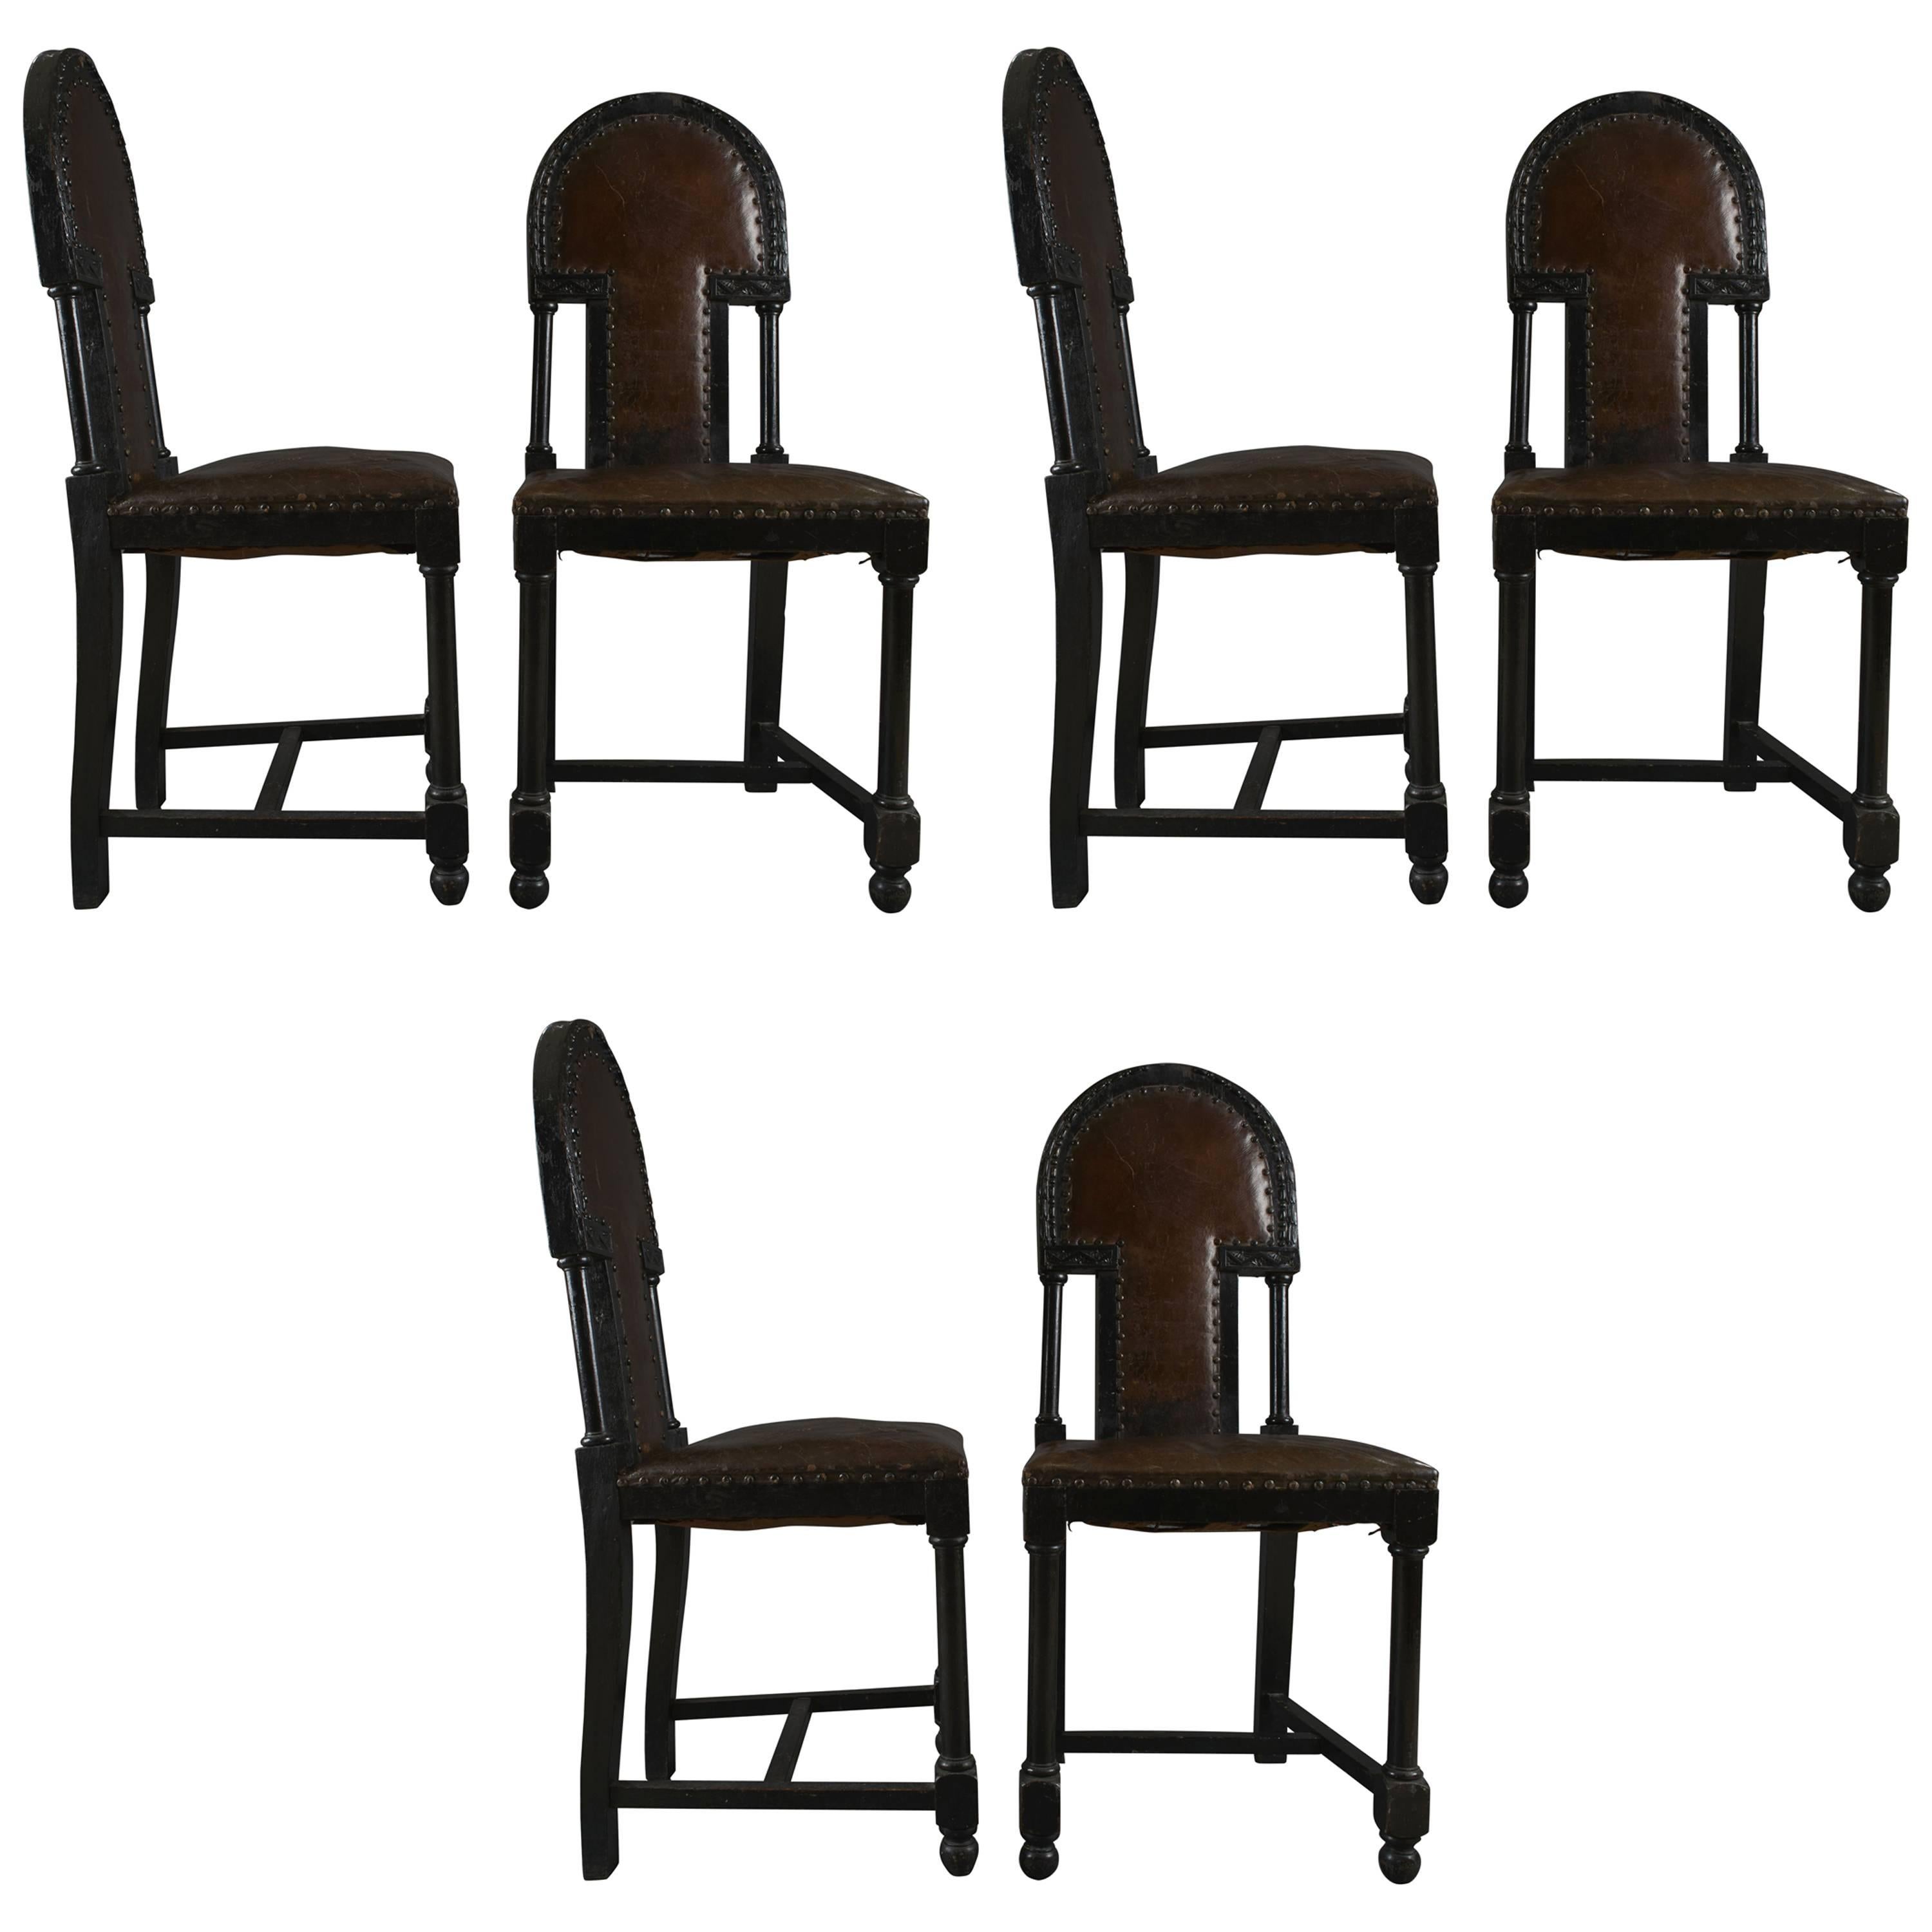 Set of Six Chairs in Darken Wood and Studded Brown Leather, Vienna, circa 1920 For Sale